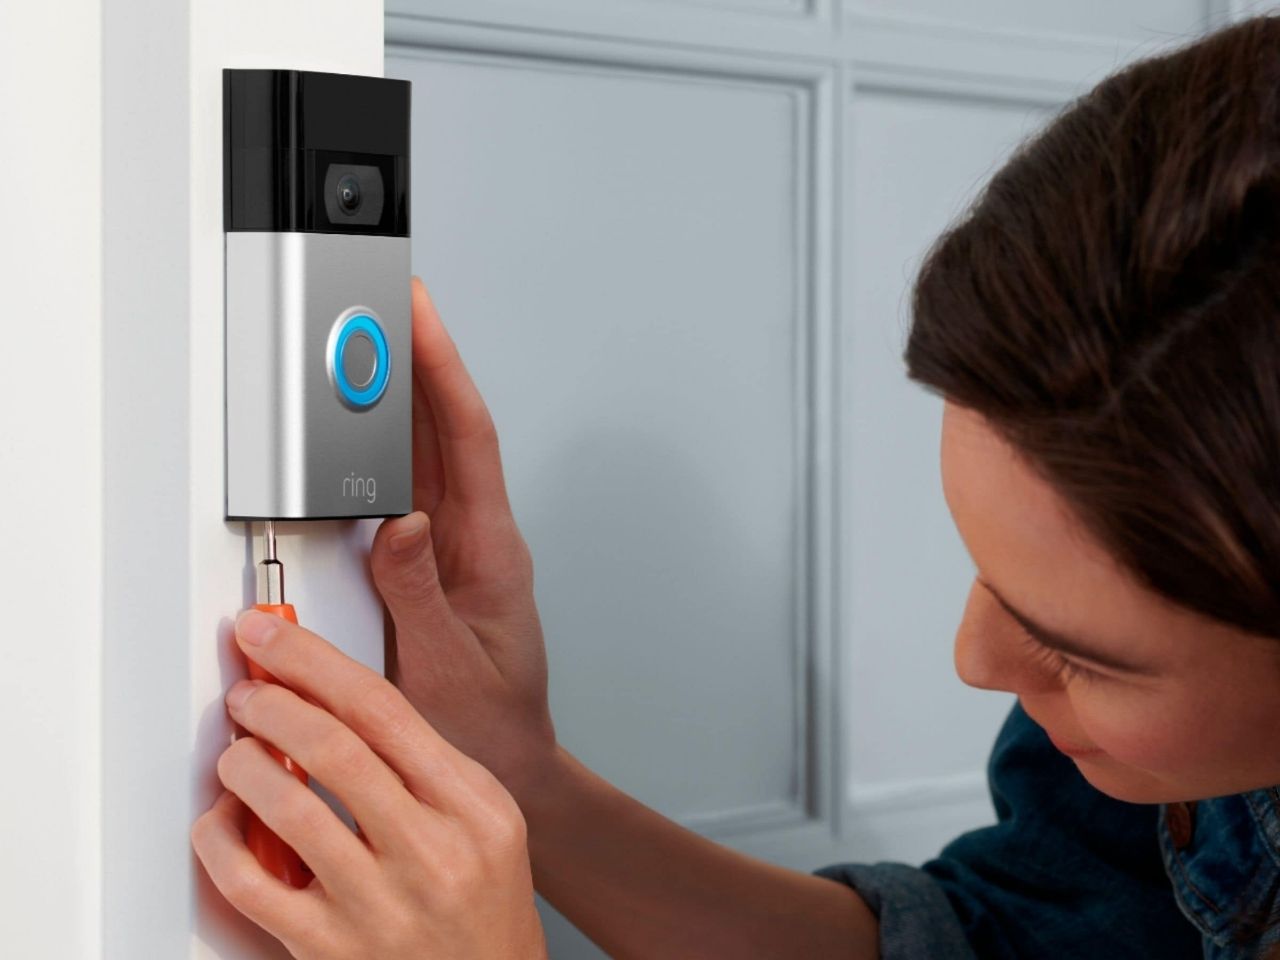 How To Change Ring Doorbell How to Remove a Ring Doorbell | Digital Trends